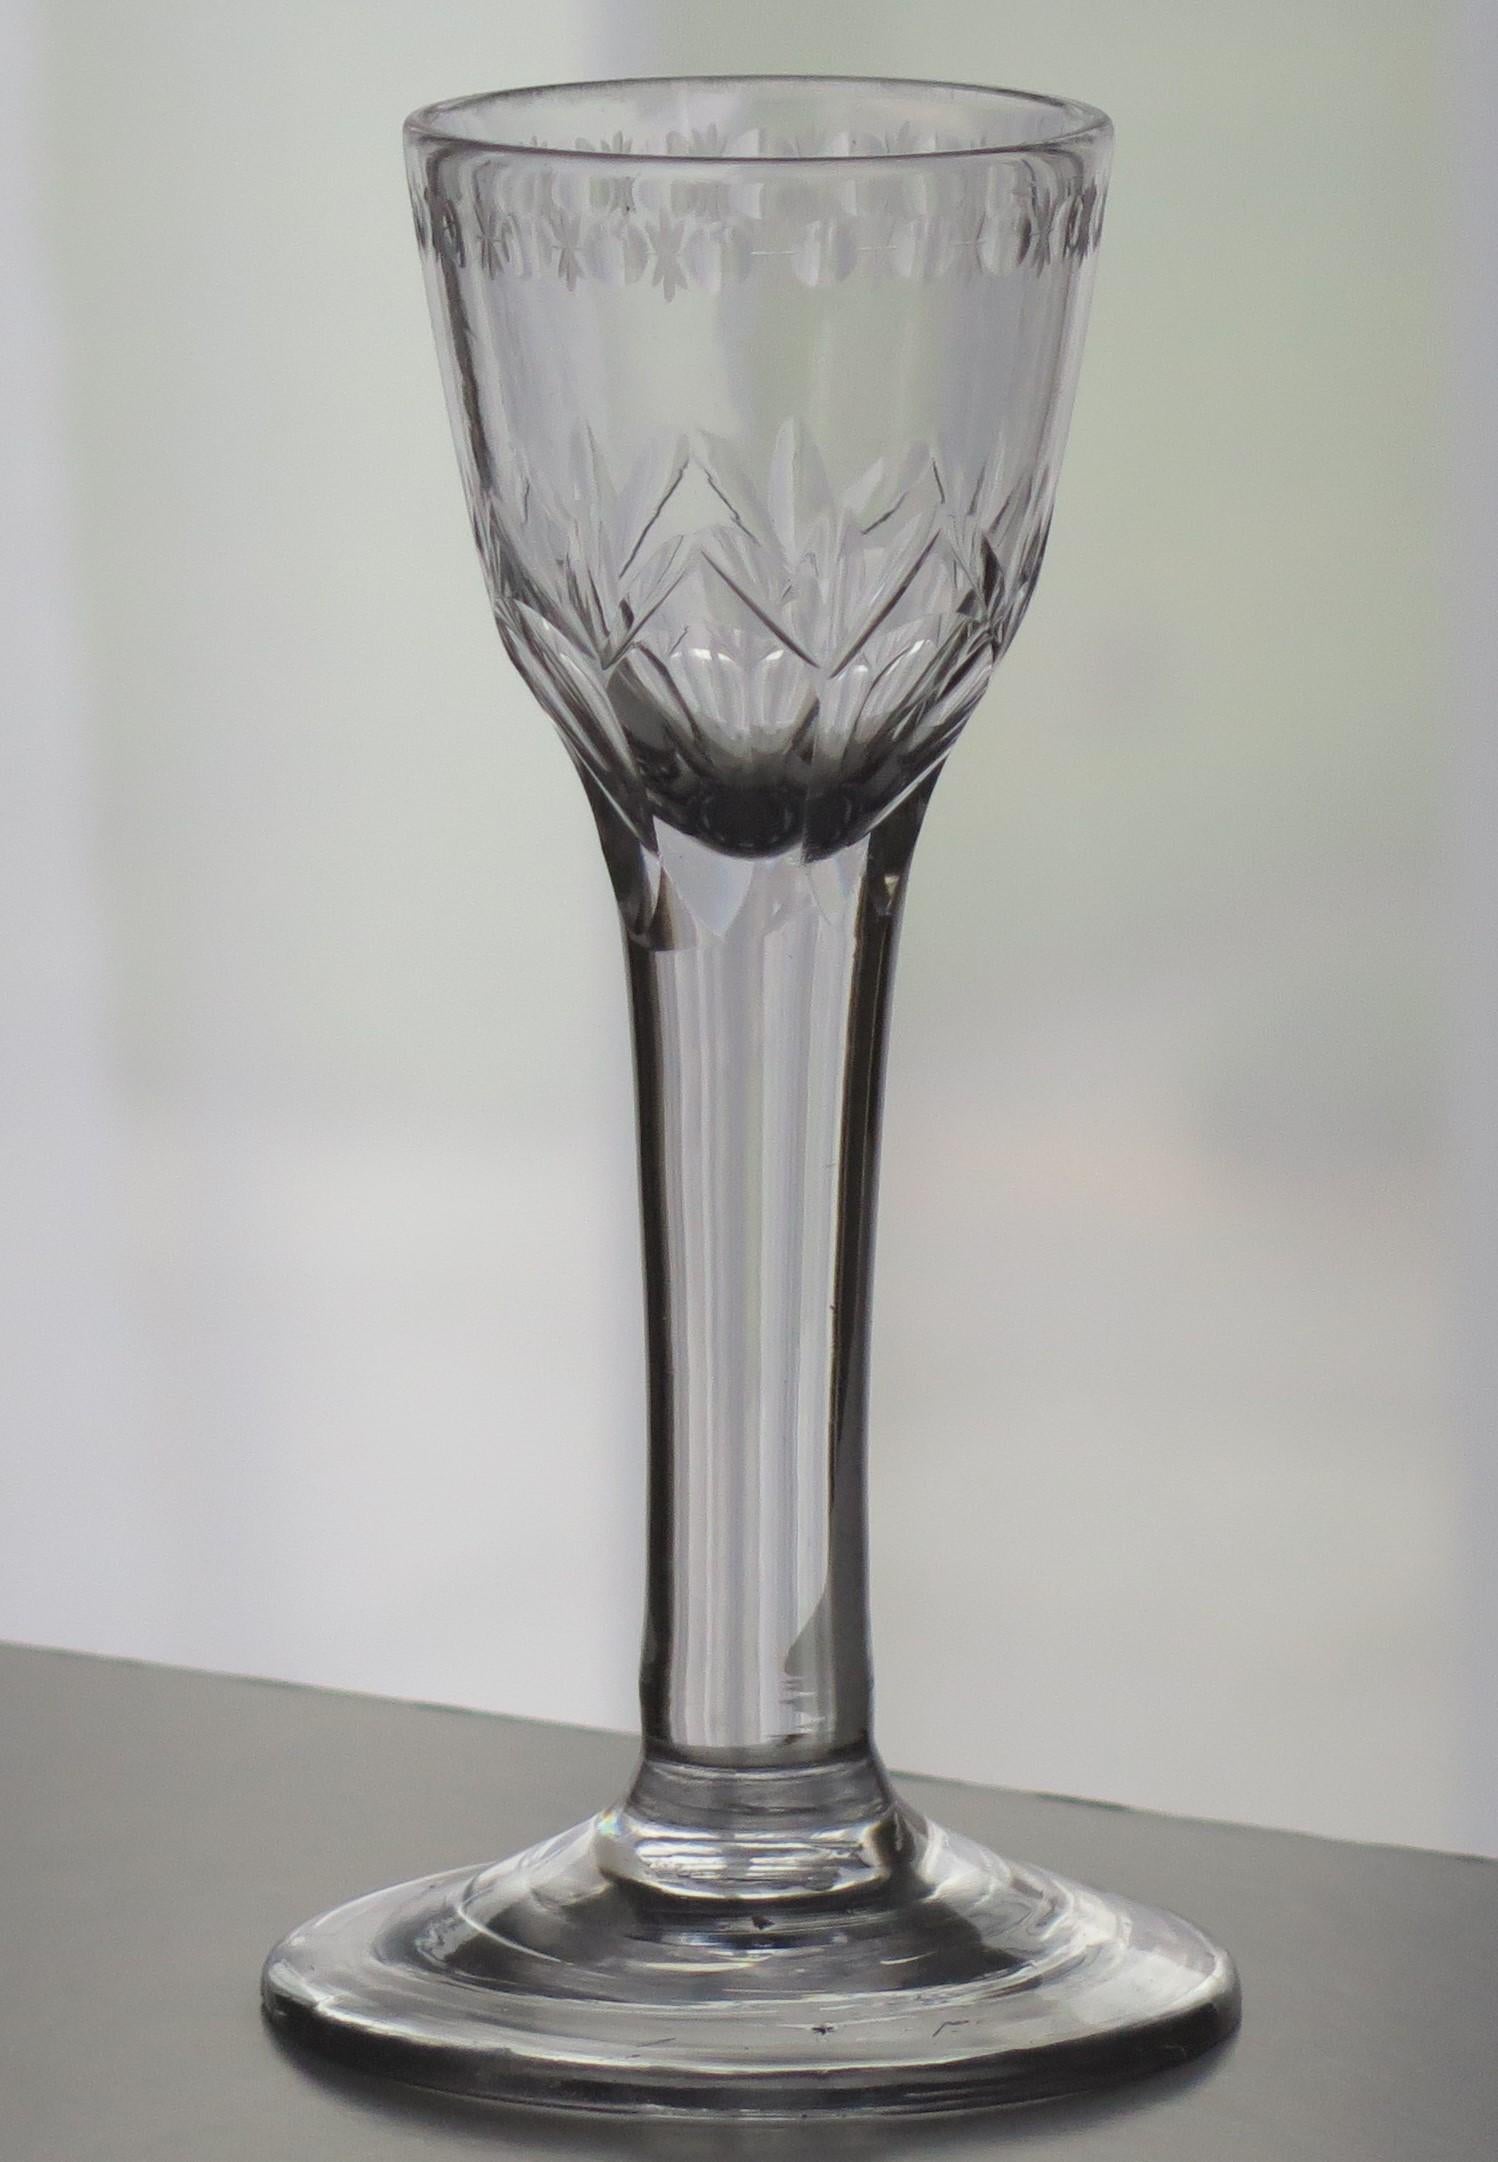 This is a very good hand-blown, English, mid-Georgian, Wine drinking glass with a round funnel (RF) engraved bowl on a solid stem, dating to the middle of the 18th century, circa 1760.

These glasses are very collectable. It is made from English